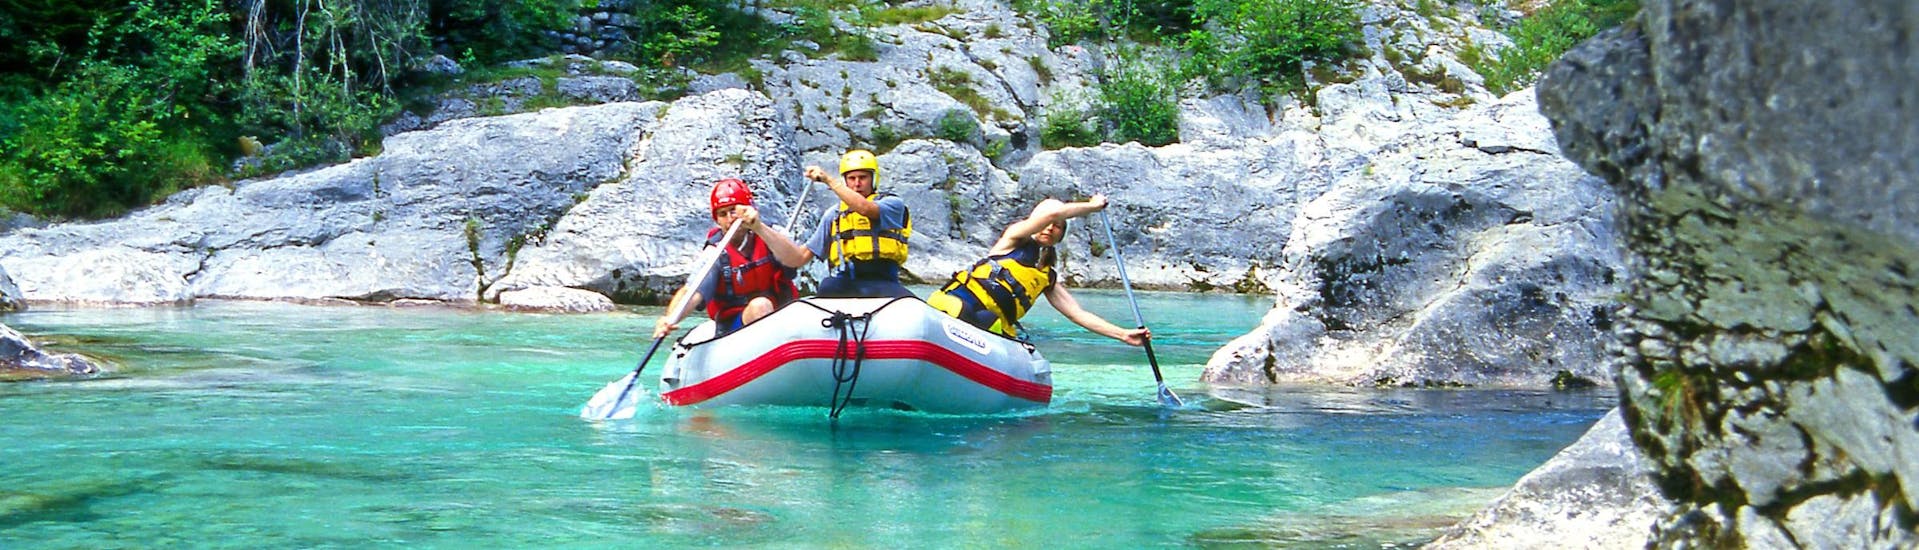 A group of young people enjoying some white water rafting fun in the rafting & canyoning hotspot of Učja Valley.